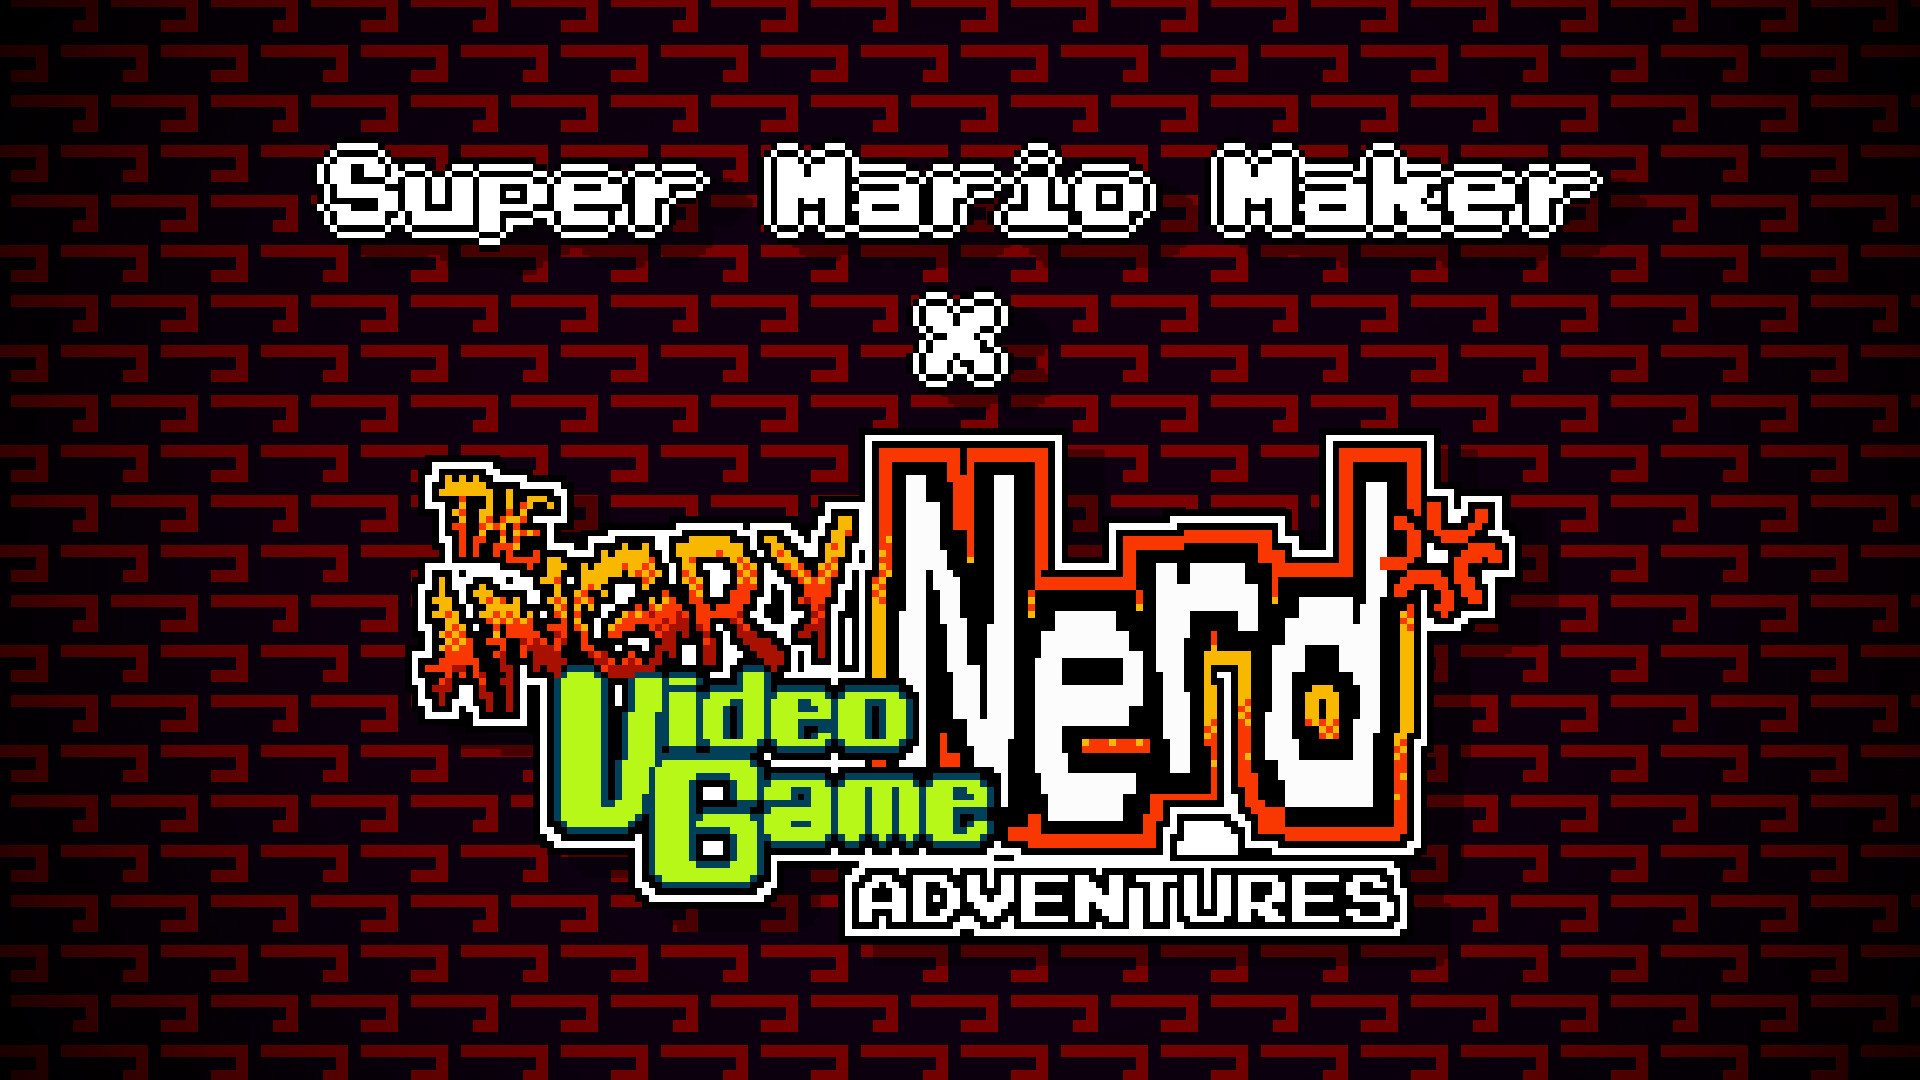 1920x1080 The Angry Video Game Nerd Adventures was released in 2013. I've always  loved the game, and I thought about wanting to create courses using the  aesthetics of ...